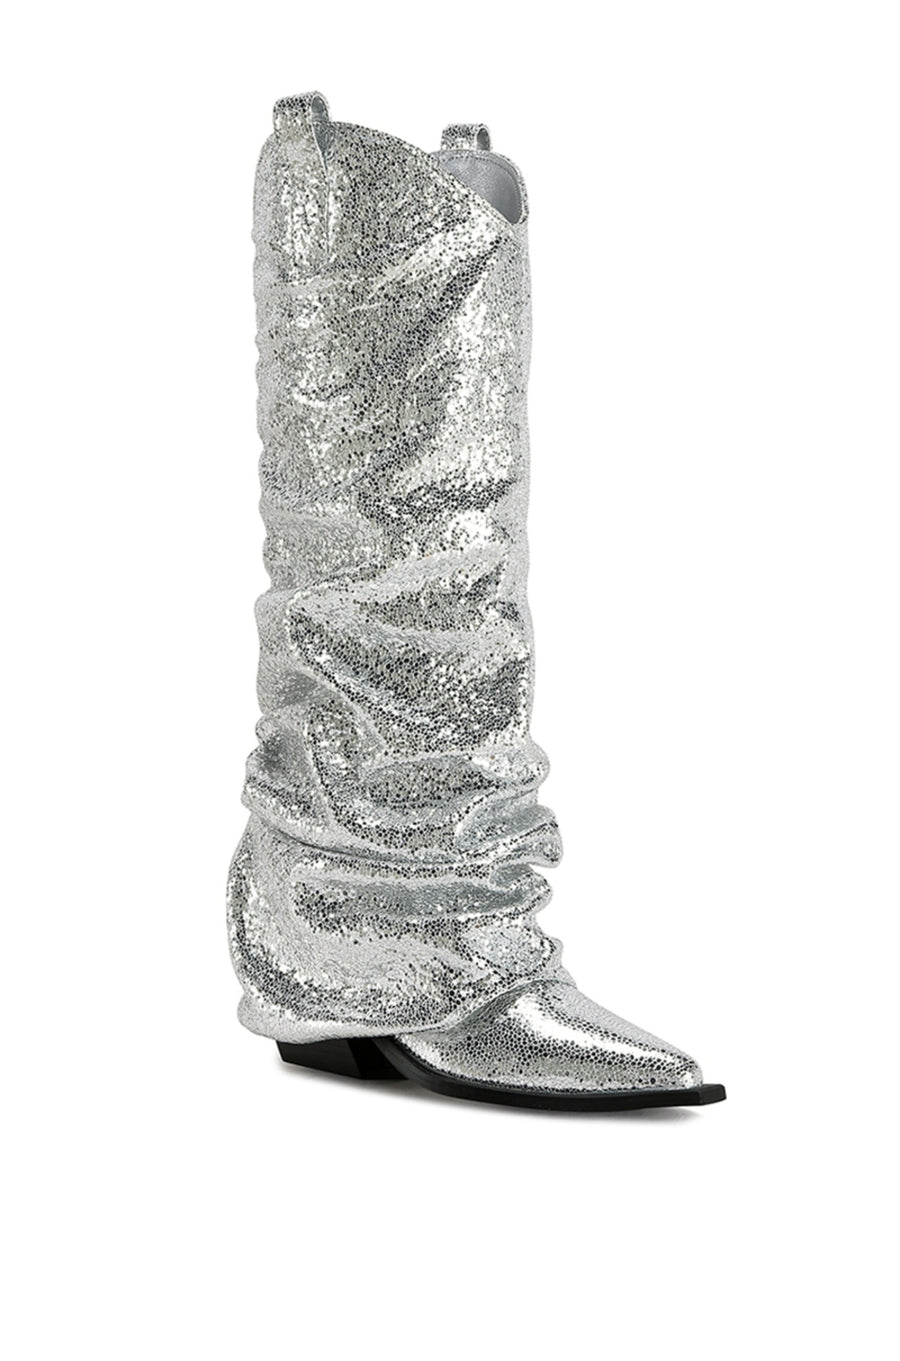 SHAWNEE-SILVER FOLD OVER WEDGE BOOT